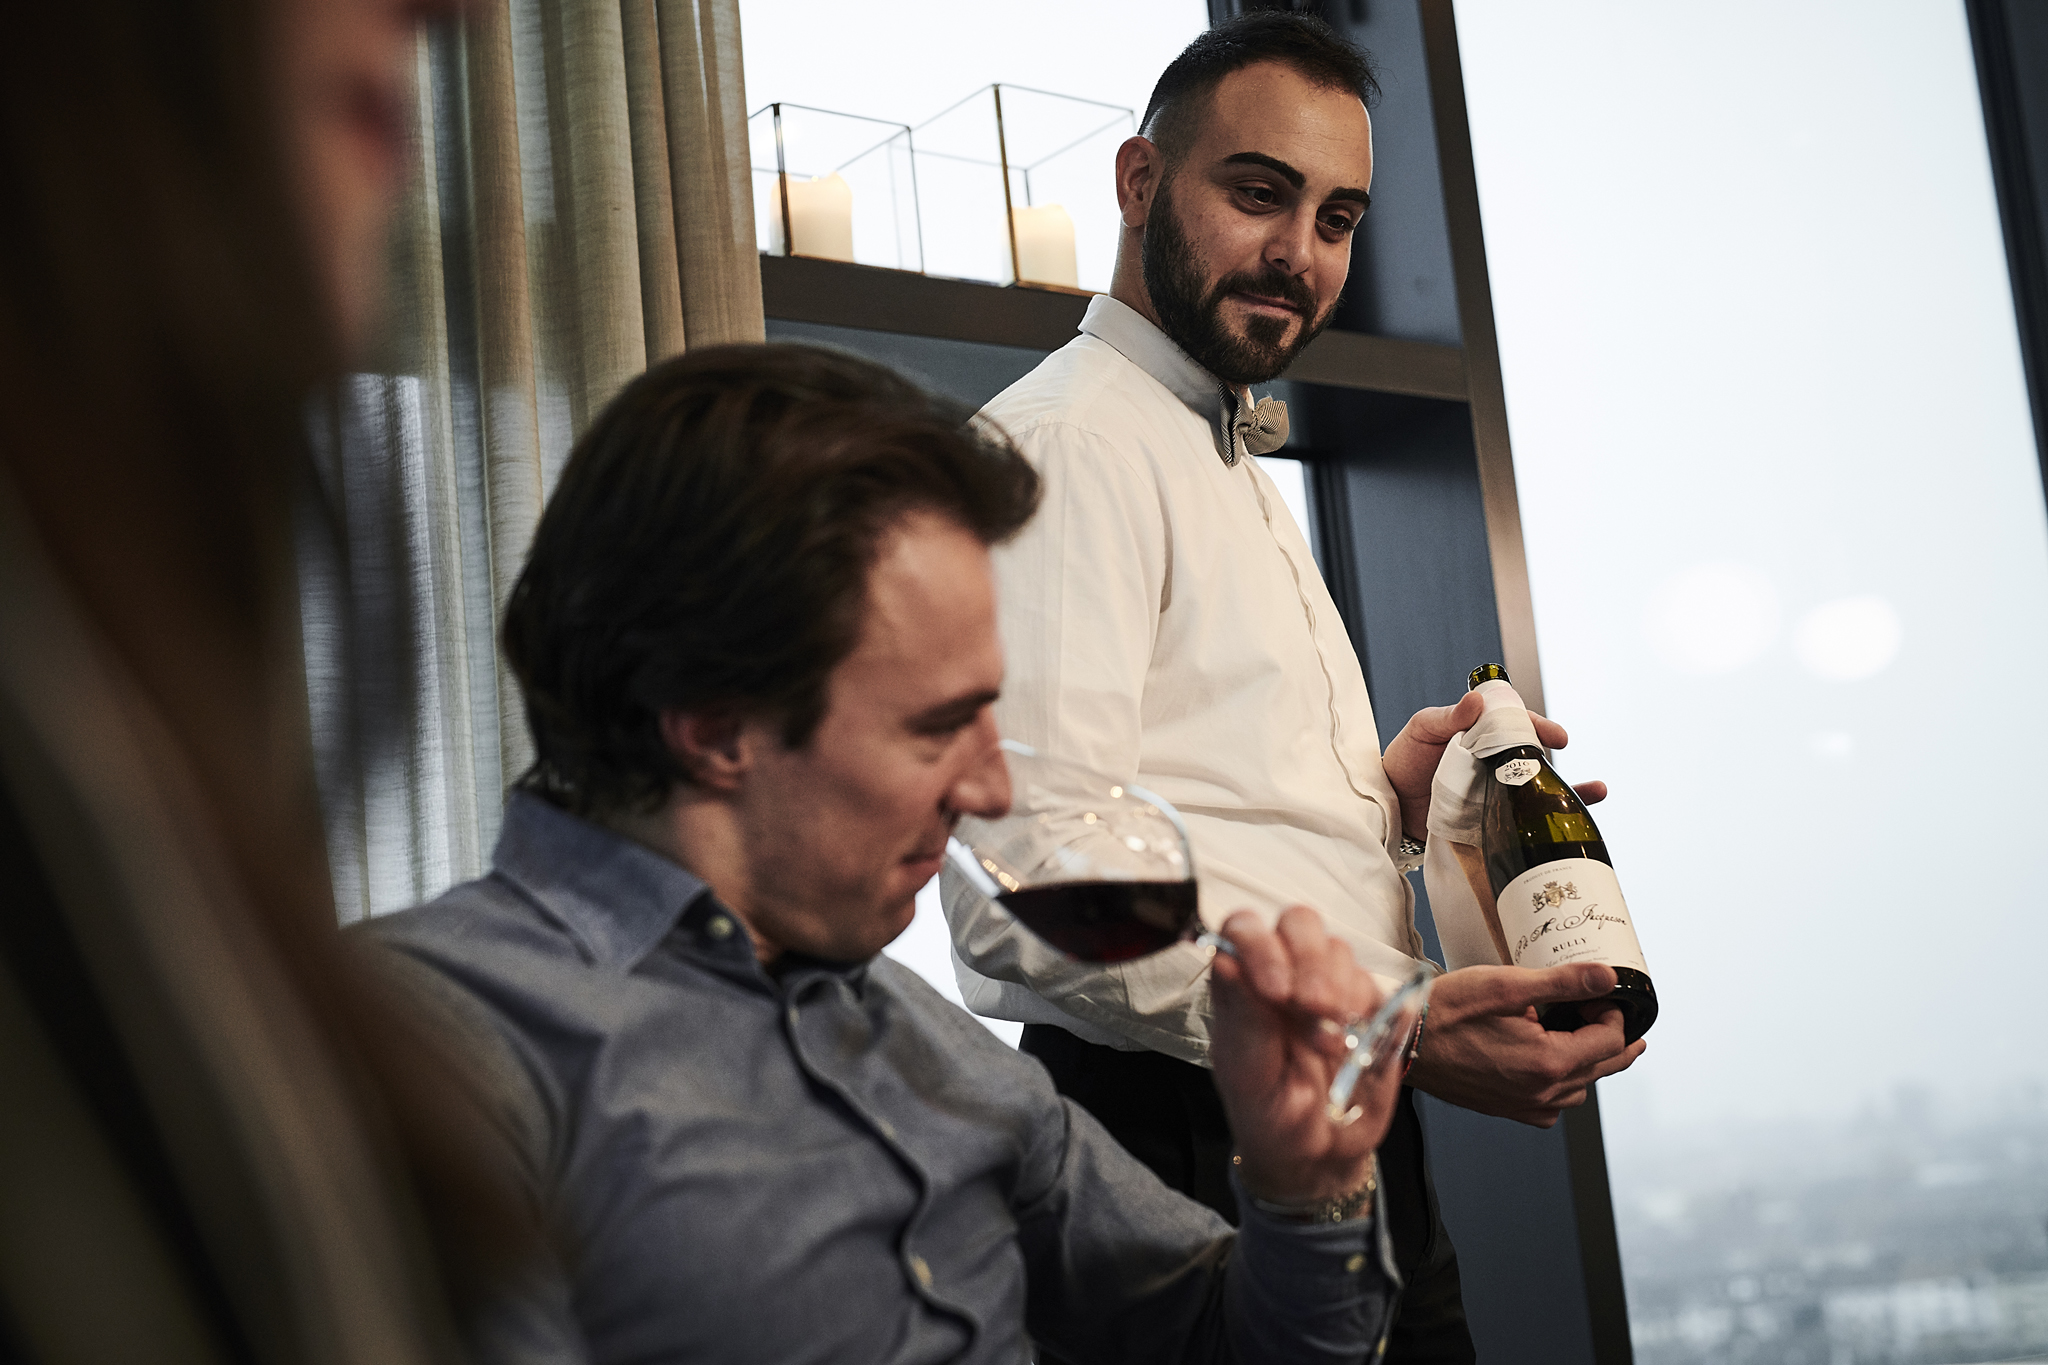 A waiter is presenting a bottle of red wine to a guest, who is tasting it